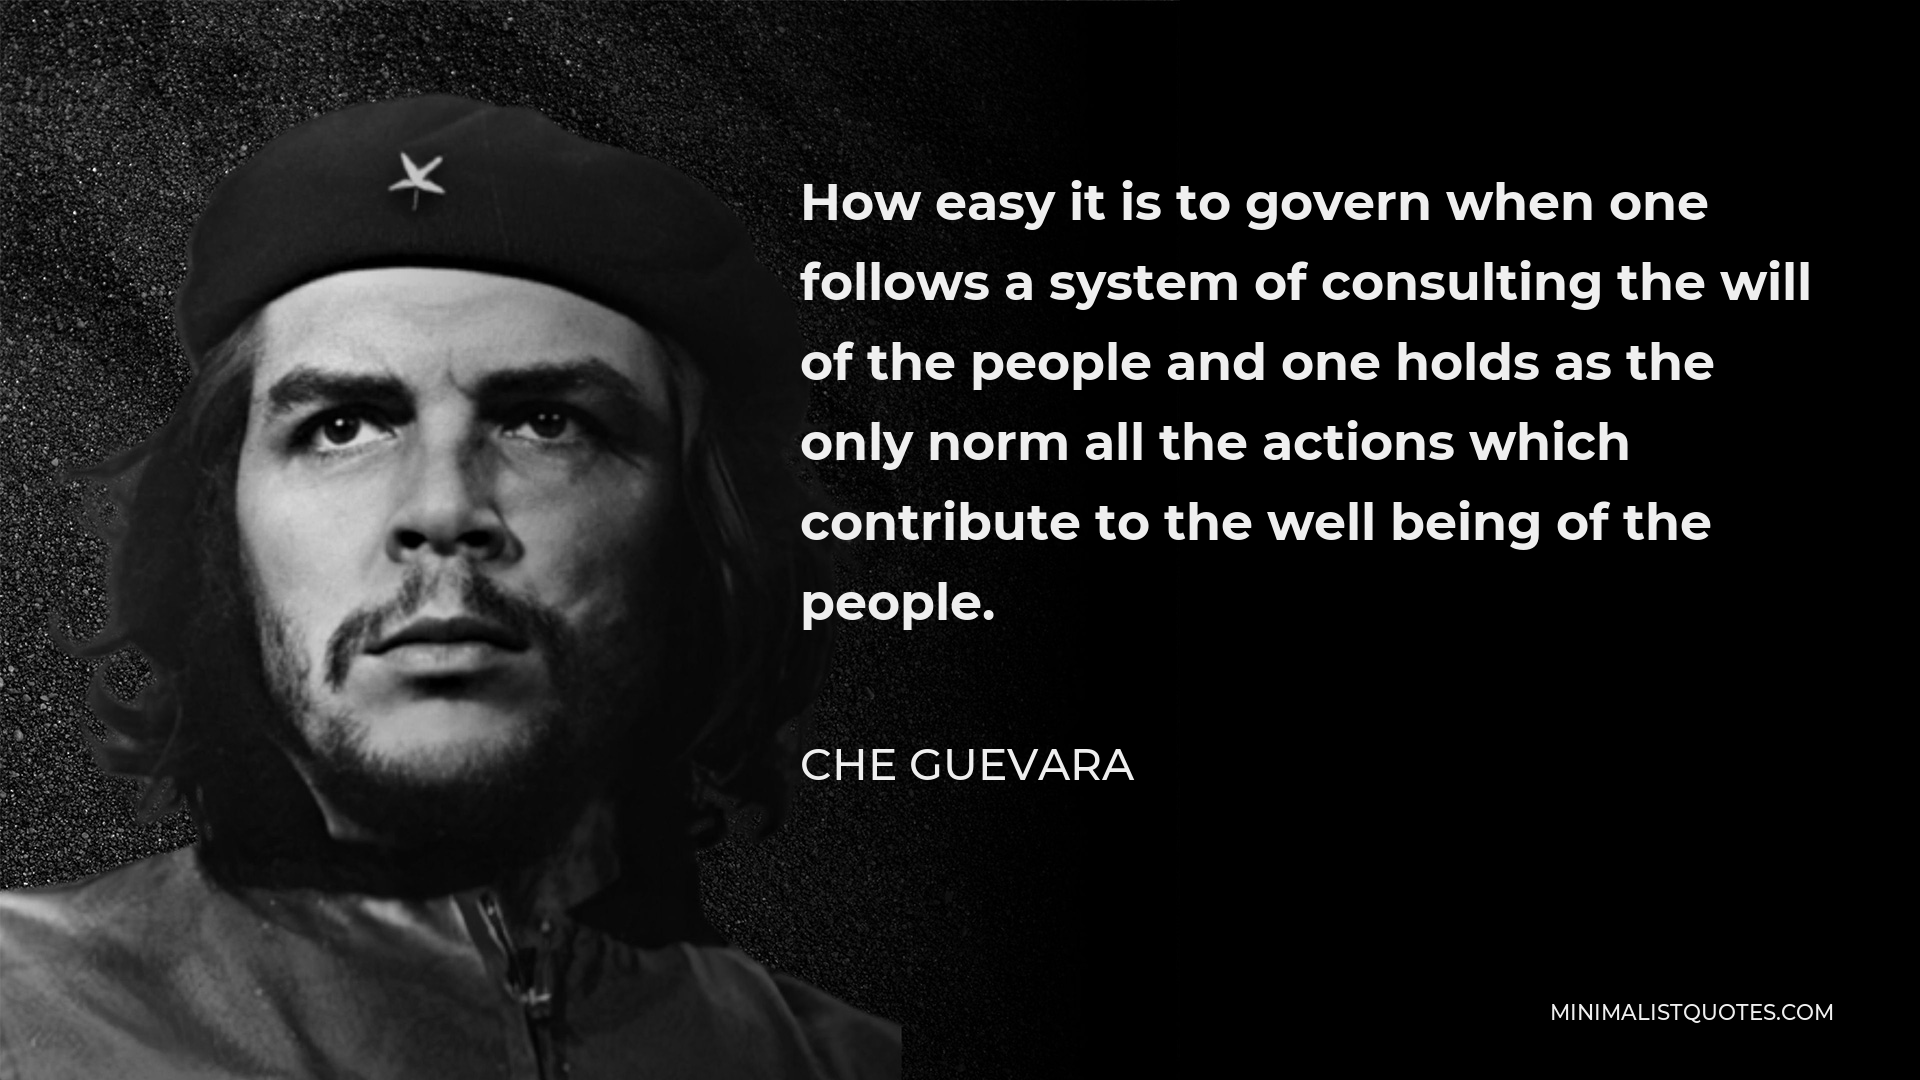 Che Guevara Quote - How easy it is to govern when one follows a system of consulting the will of the people and one holds as the only norm all the actions which contribute to the well being of the people.